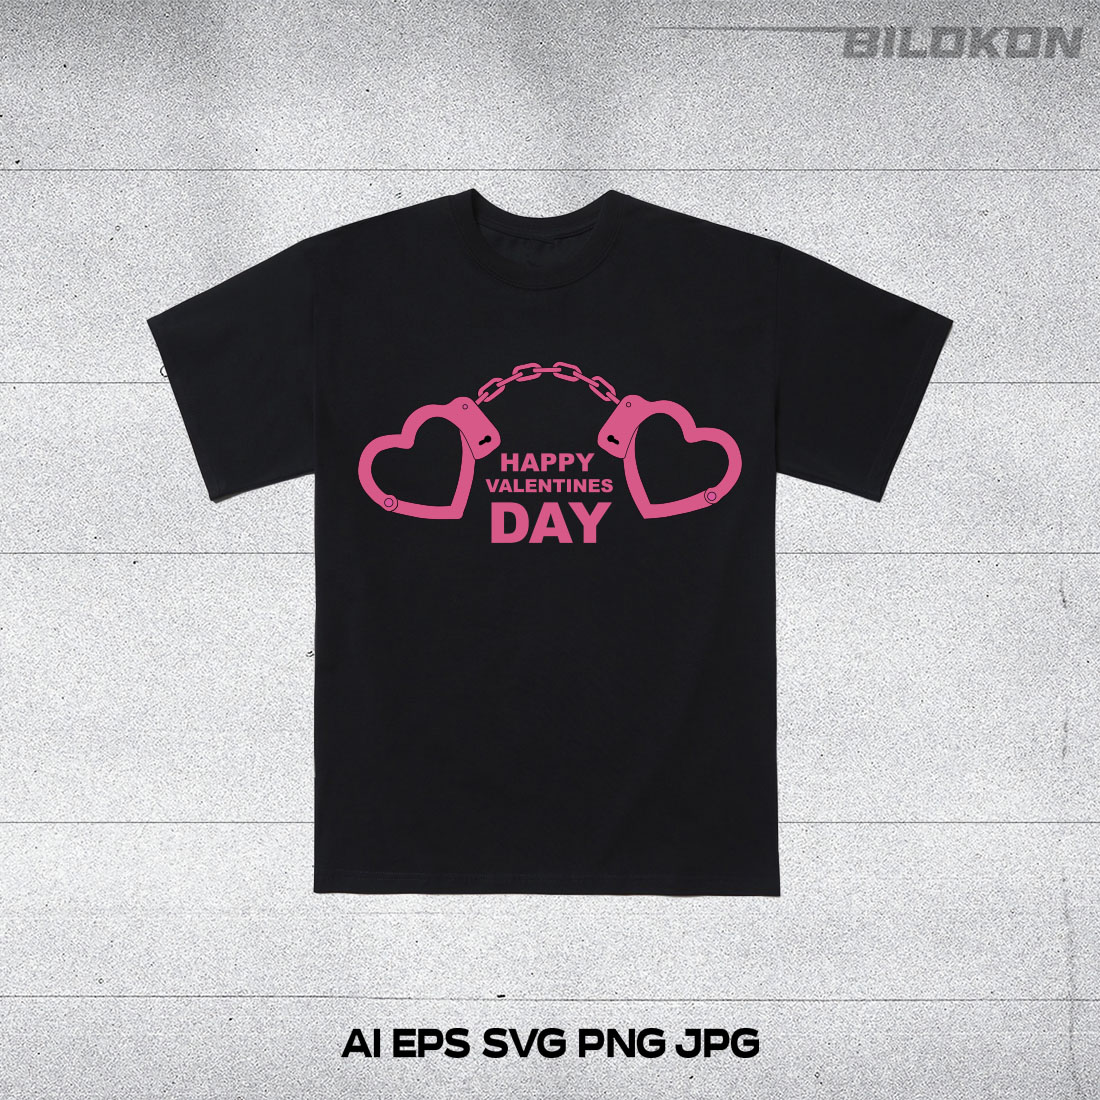 T-shirt Valentine's Day Handcuffs in the Shape of a Heart SVG cover image.